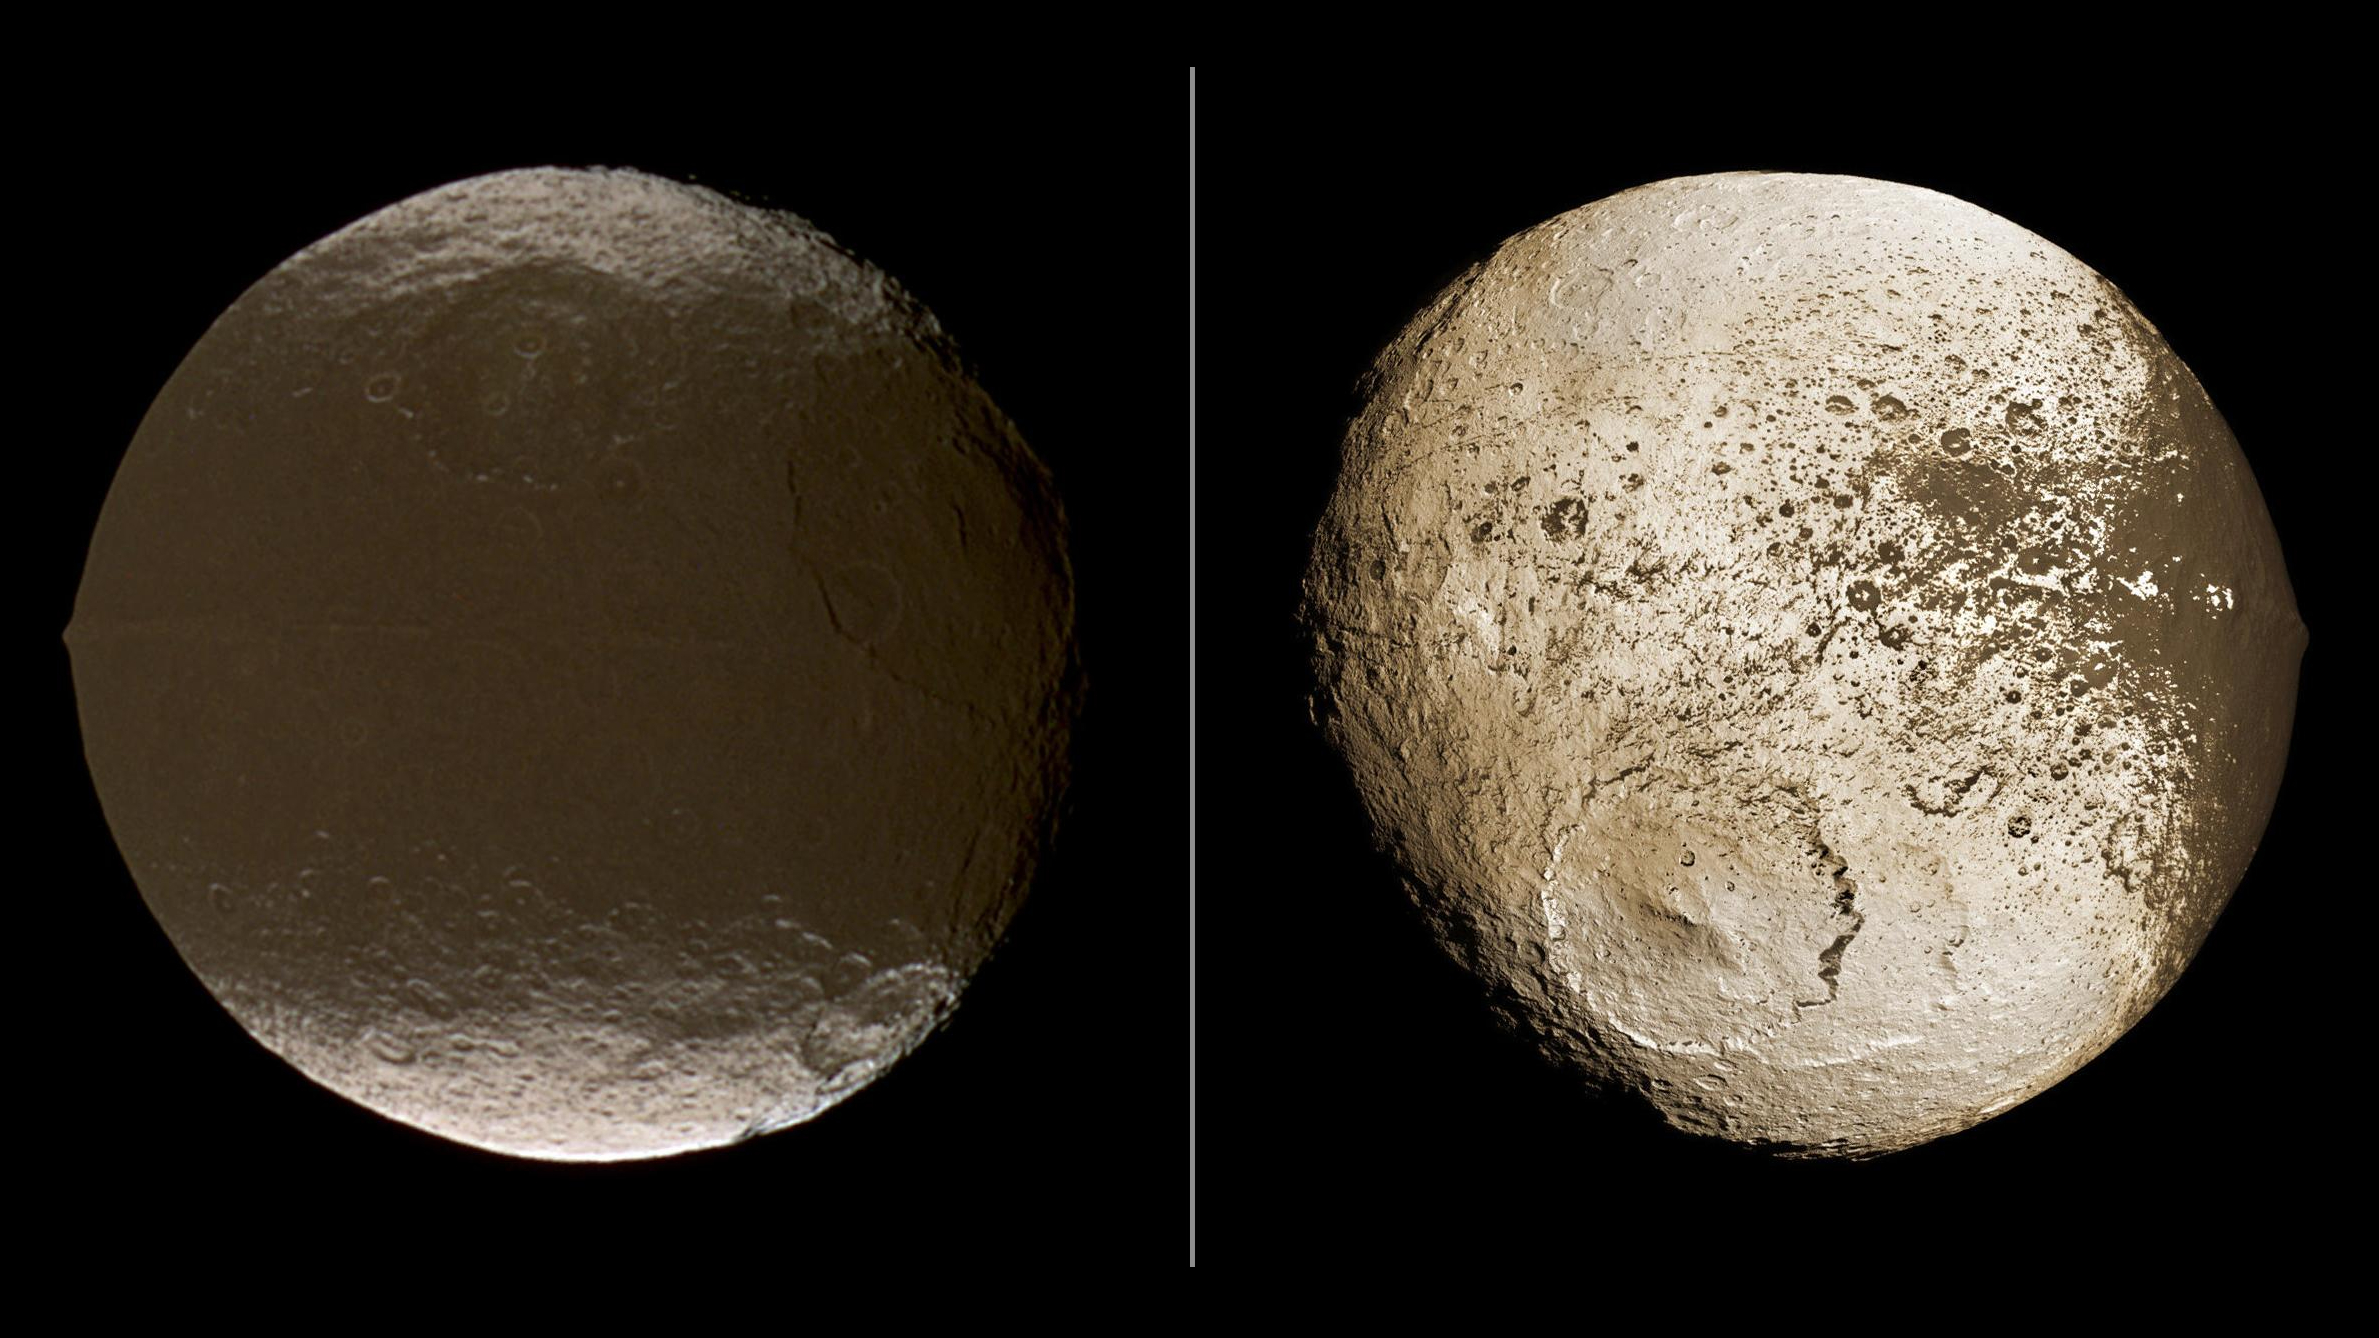 Saturn’s moon Iapetus exhibits extreme differences in brightness across the surface depending on which side faces the sun.